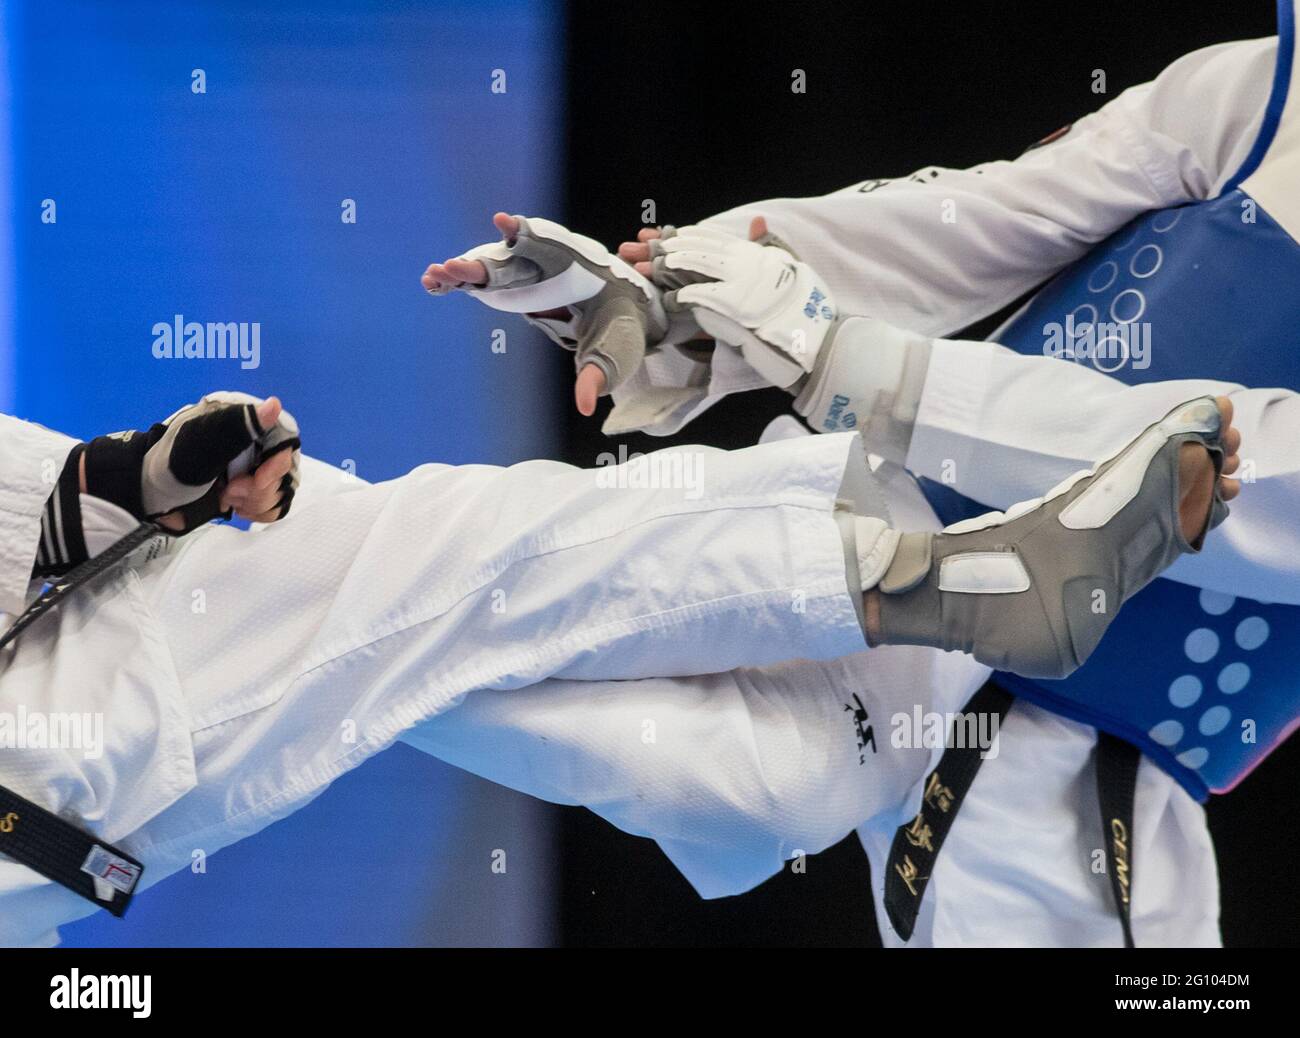 Dortmund, Germany. 04th June, 2021. Finals 2021 - Taekwondo in the Helmut-Körnig-Halle: Two fighters in their semi-final. Credit: Bernd Thissen/dpa/Alamy Live News Stock Photo